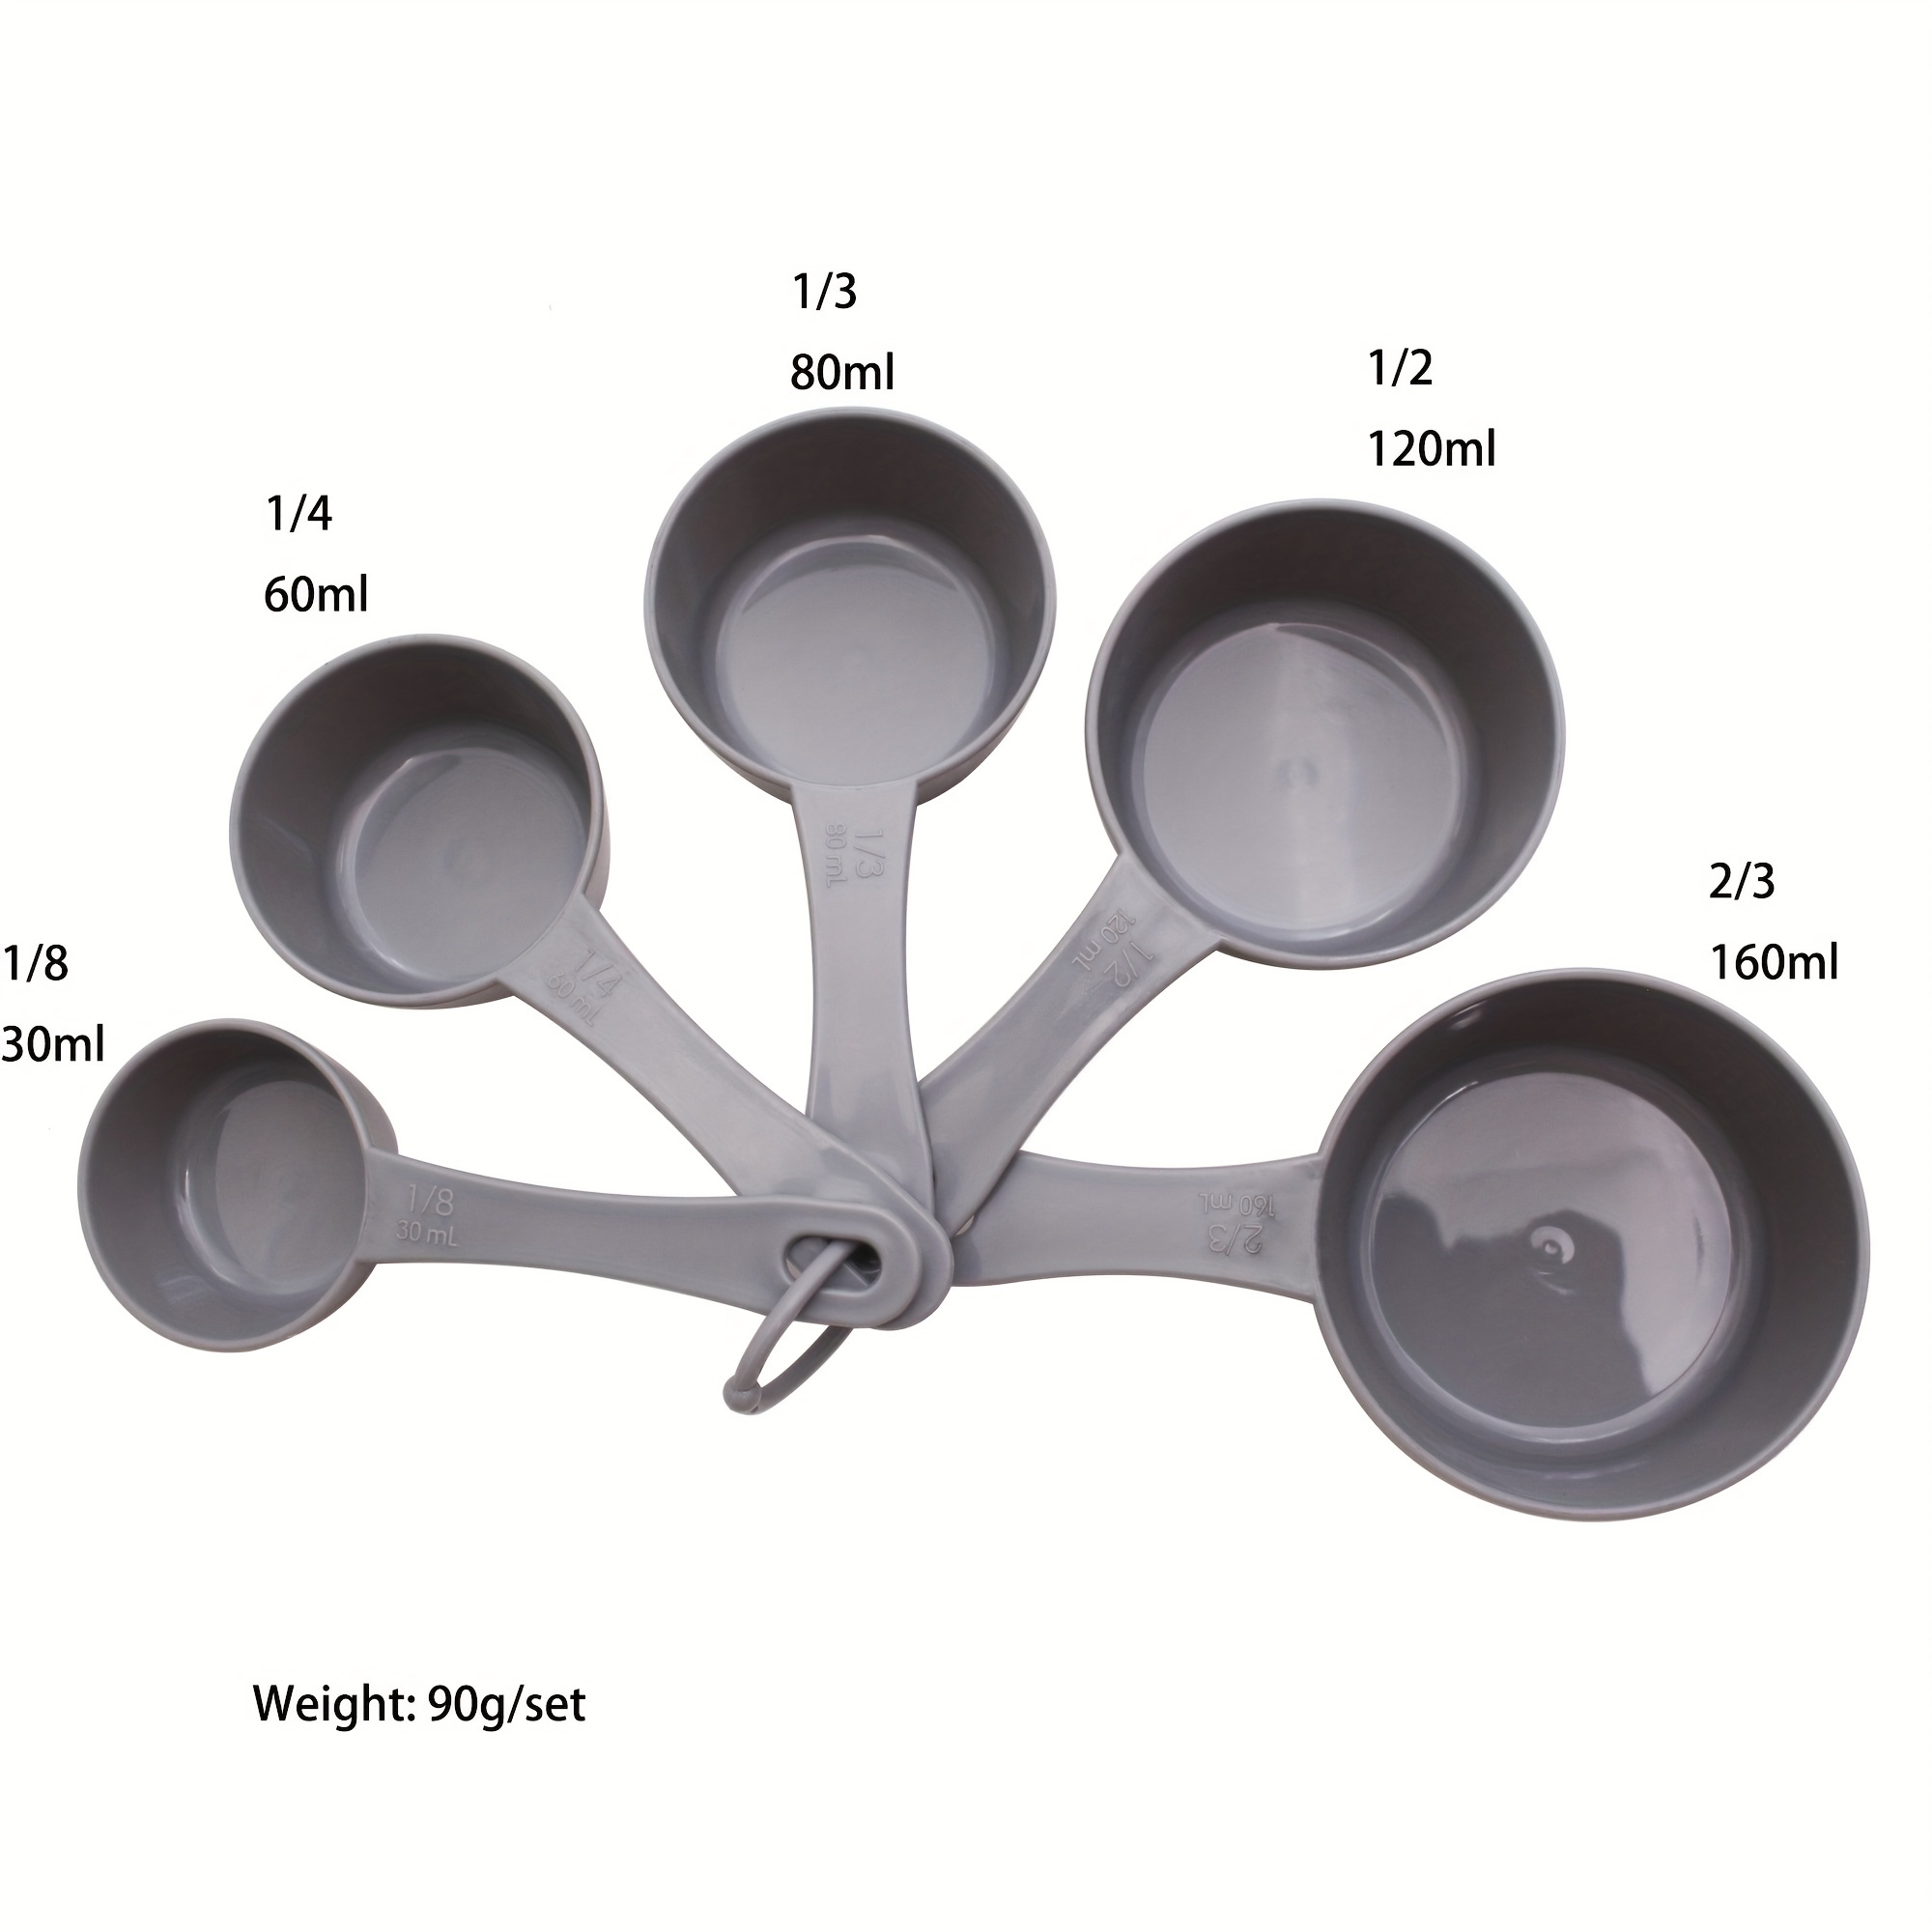 MEASURING EQUIPMENT Measuring Spoons Dry Measuring Cups Liquid Measuring Cup  Spatula Wonder Cup Sifter. - ppt download